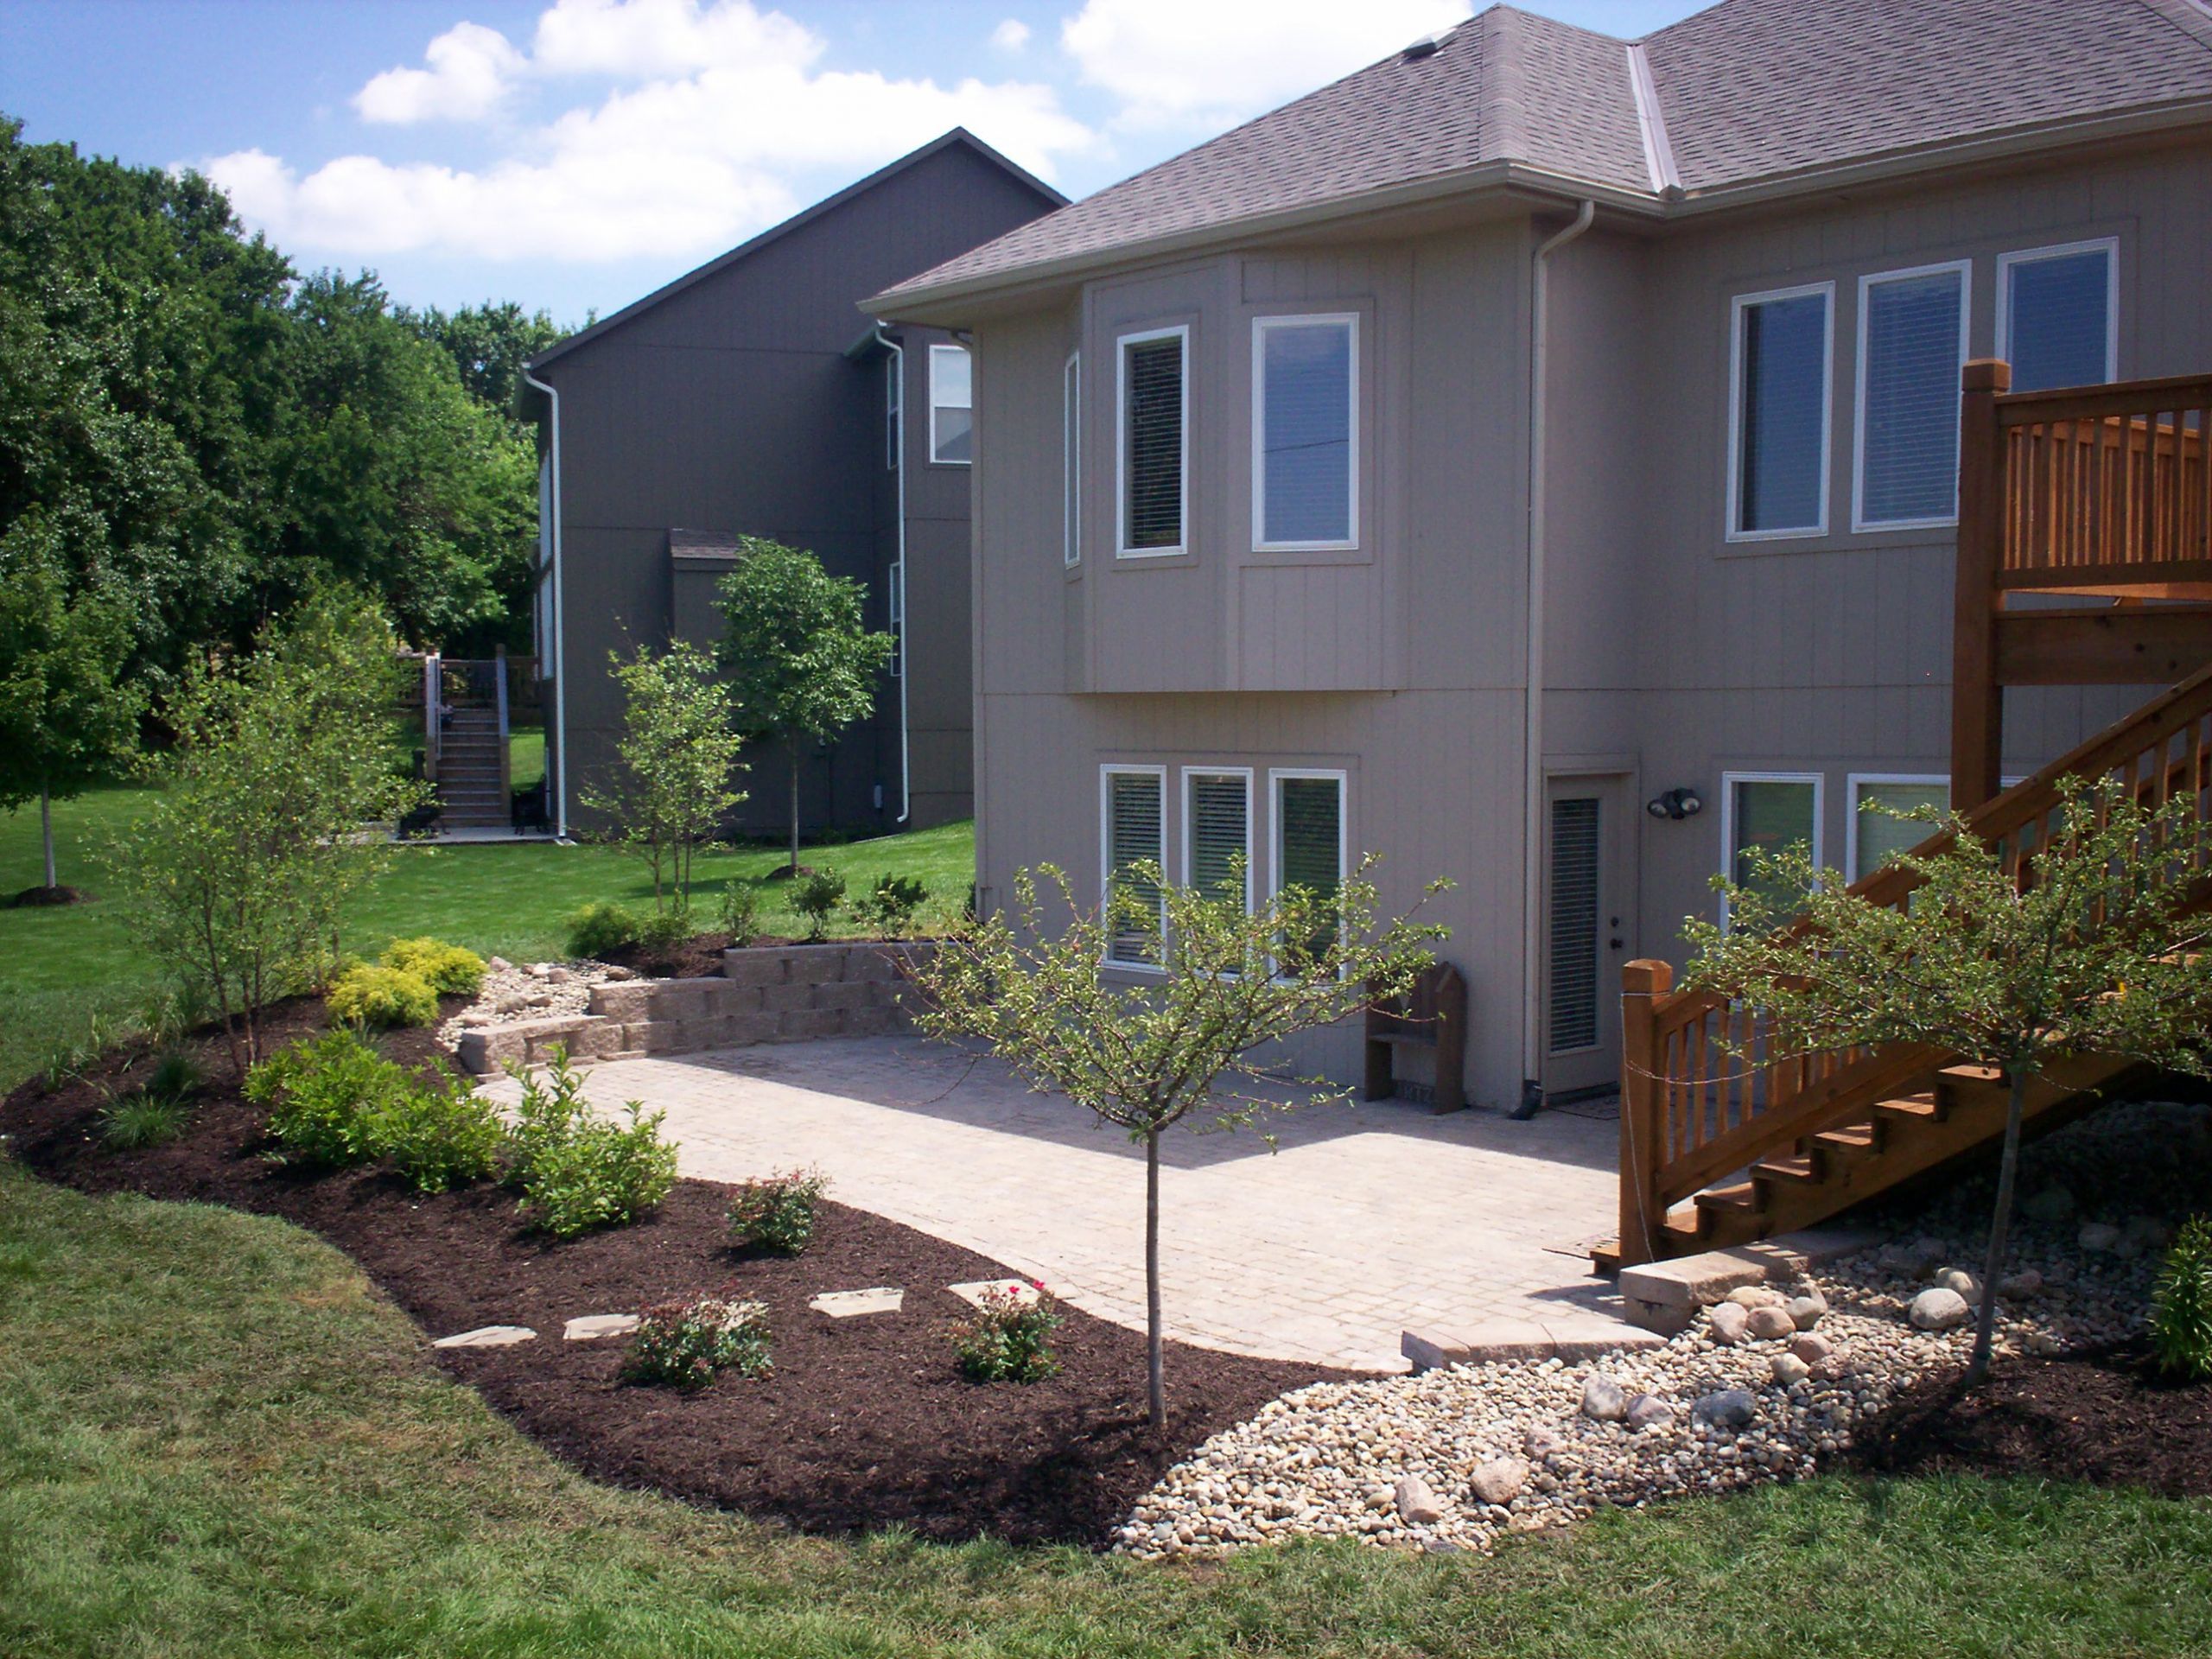 Landscaping Ideas Around Patio
 Patios and Retaining Walls